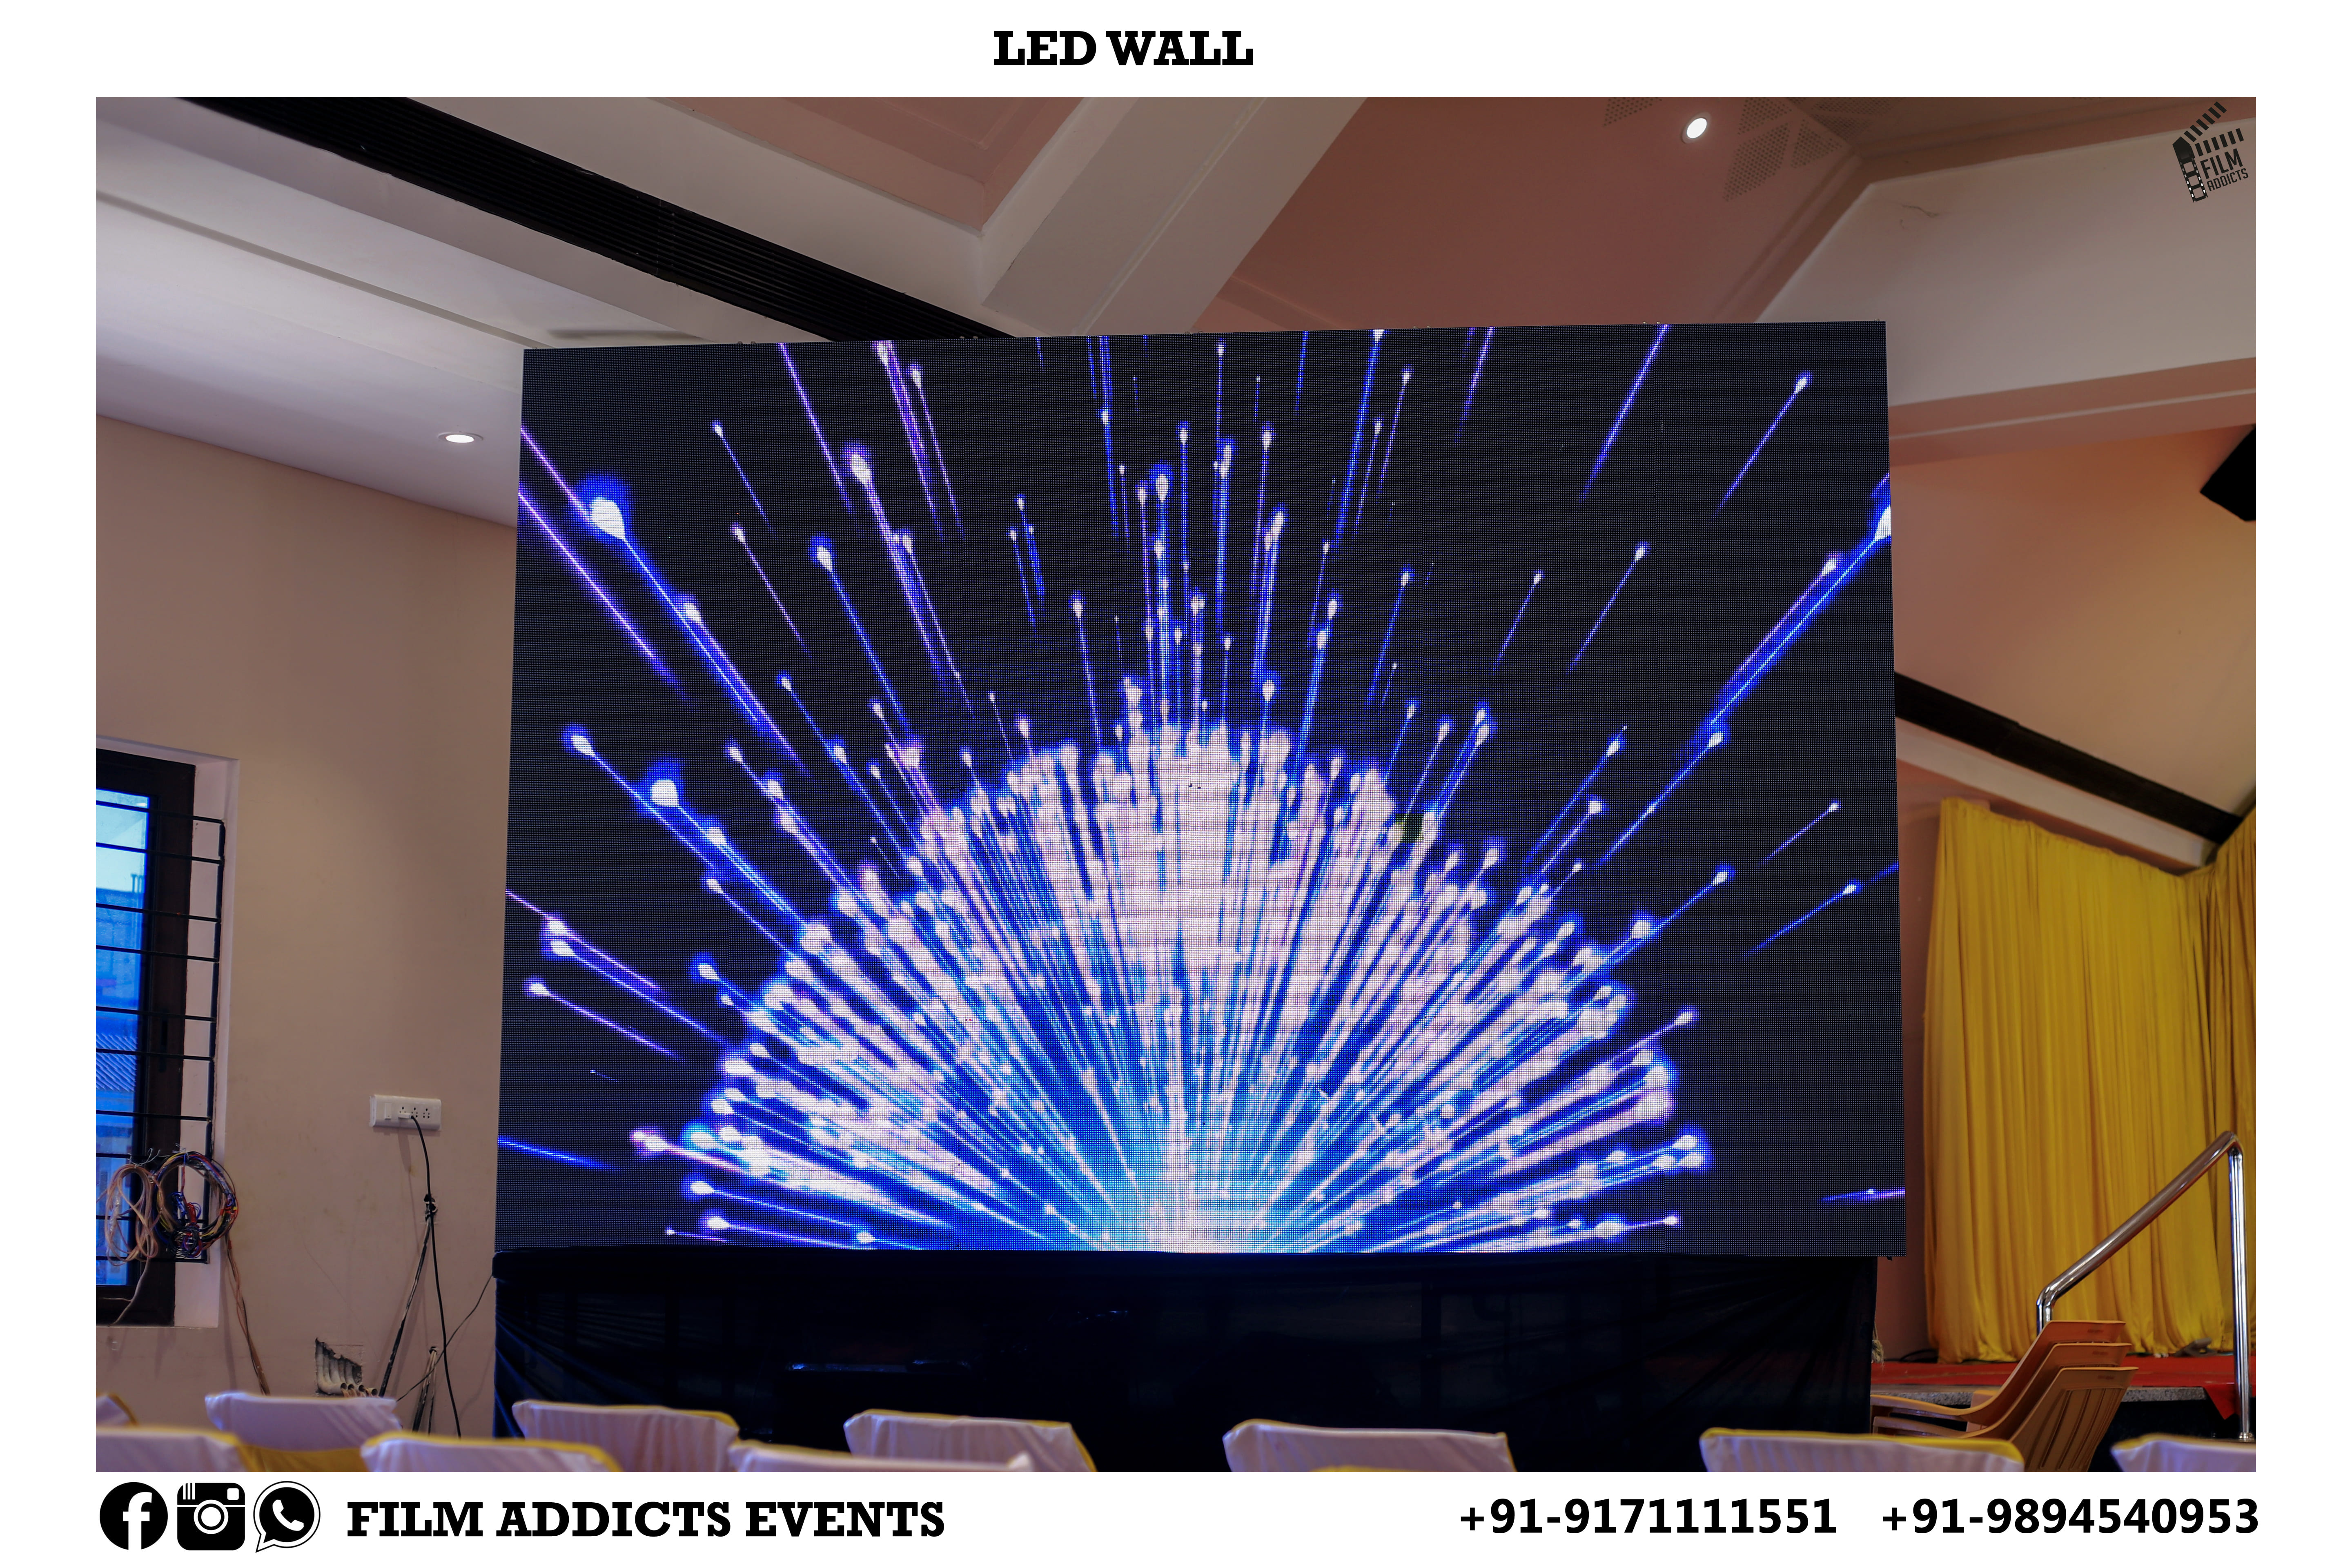 Best LED Video Wall Rental Services in Virudhunagar, Best LED Wall Services In Virudhunagar ,Best LED Wall Rental Services In Virudhunagar, Best Budget LED Wall Rental  Services in Virudhunagar, Best Wedding LED Wall Rentals In Virudhunagar, Best clarity in led wall rentals in Virudhunagar, Best cost-effective display rentals in Virudhunagar, Best crisp, bright, high resolution led video services in Virudhunagar, Best led wall rental services in Virudhunagar, Best tailored lighting, vision and sound solutions led rentals in Virudhunagar, Best outstanding new LED panels rental Service in Virudhunagar, Best Indoor and Outdoor LED panels rental Service in Virudhunagar, Best high resolution LED display rental Service in Virudhunagar, Best Wedding LED wall rentals in Virudhunagar, Best Grand wedding LED wall rentals in Virudhunagar, Best LED wall rental Service in Virudhunagar, Best LED Video Services in Virudhunagar, Best Grand Wedding LED wall Renatls in Virudhunagar, Best LED wall Rentals for Grand Occasions in Virudhunagar, Best Wedding LED Video Services in Virudhunagar, Best Wedding LED video wall Rental Services in Virudhunagar, Best LED Video Wall Rentals for Grand Occassions in Virudhunagar, Best LED Video Wall Rentals for events in Virudhunagar, Best LED video Services for live events in Virudhunagar, Best video wall rentals for Live events in Virudhunagar, Best LED Video Wall Rentals for Live events in Virudhunagar, Best LED Video Wall On Hire in Virudhunagar, Best LED Video Wall Services in Virudhunagar, Best LED Video Wall Service Systems in Virudhunagar, Best LED Wall Washer Light Services in Virudhunagar, Best LED Wall Light Services in Virudhunagar, Best LED Wall Mount Bracket Services in Virudhunagar.